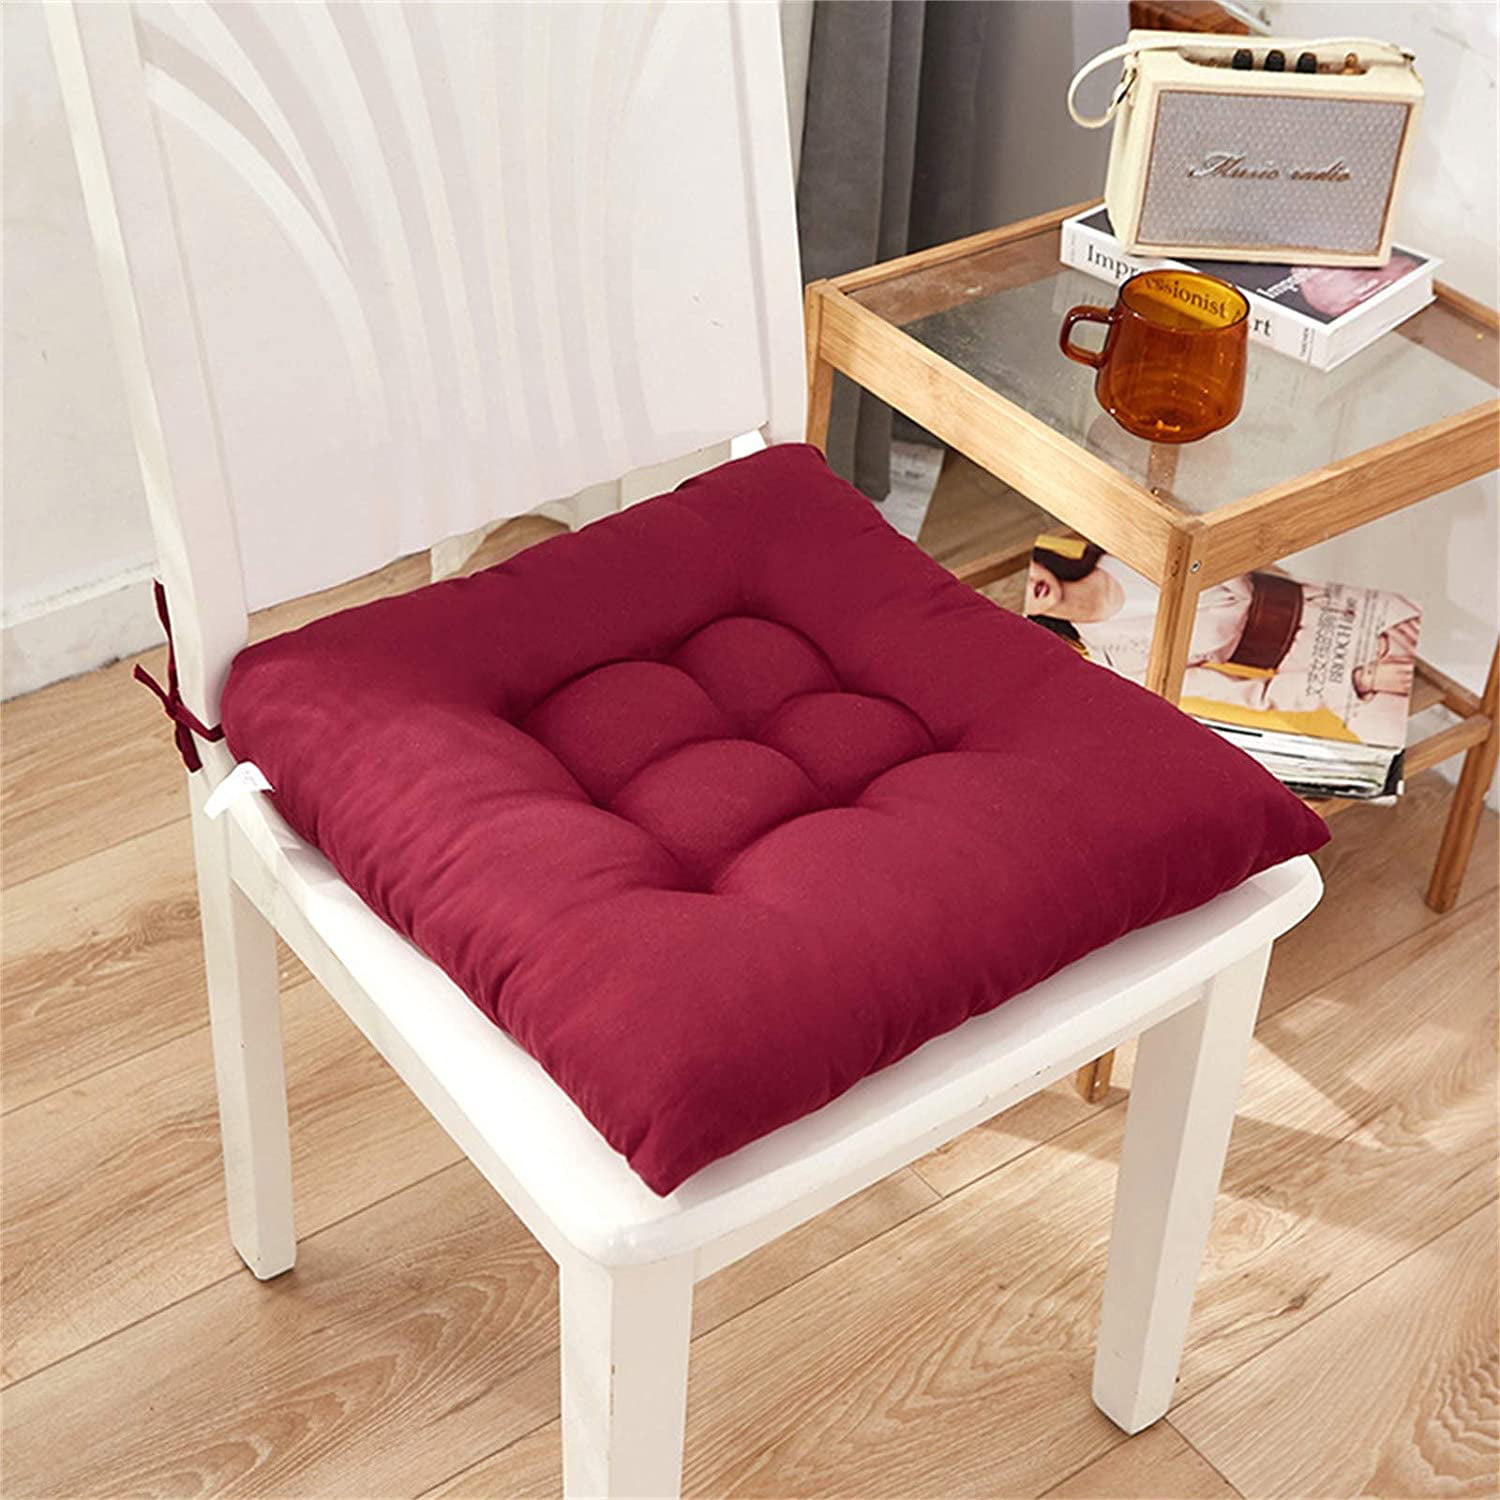 Leaqu Chair Pads Seat Cushion with Ties, Outdoor Indoor Soft Thicken Comfy Seat Pads Cushion, Dining Room Kitchen Chair Cushions for Home Office Car